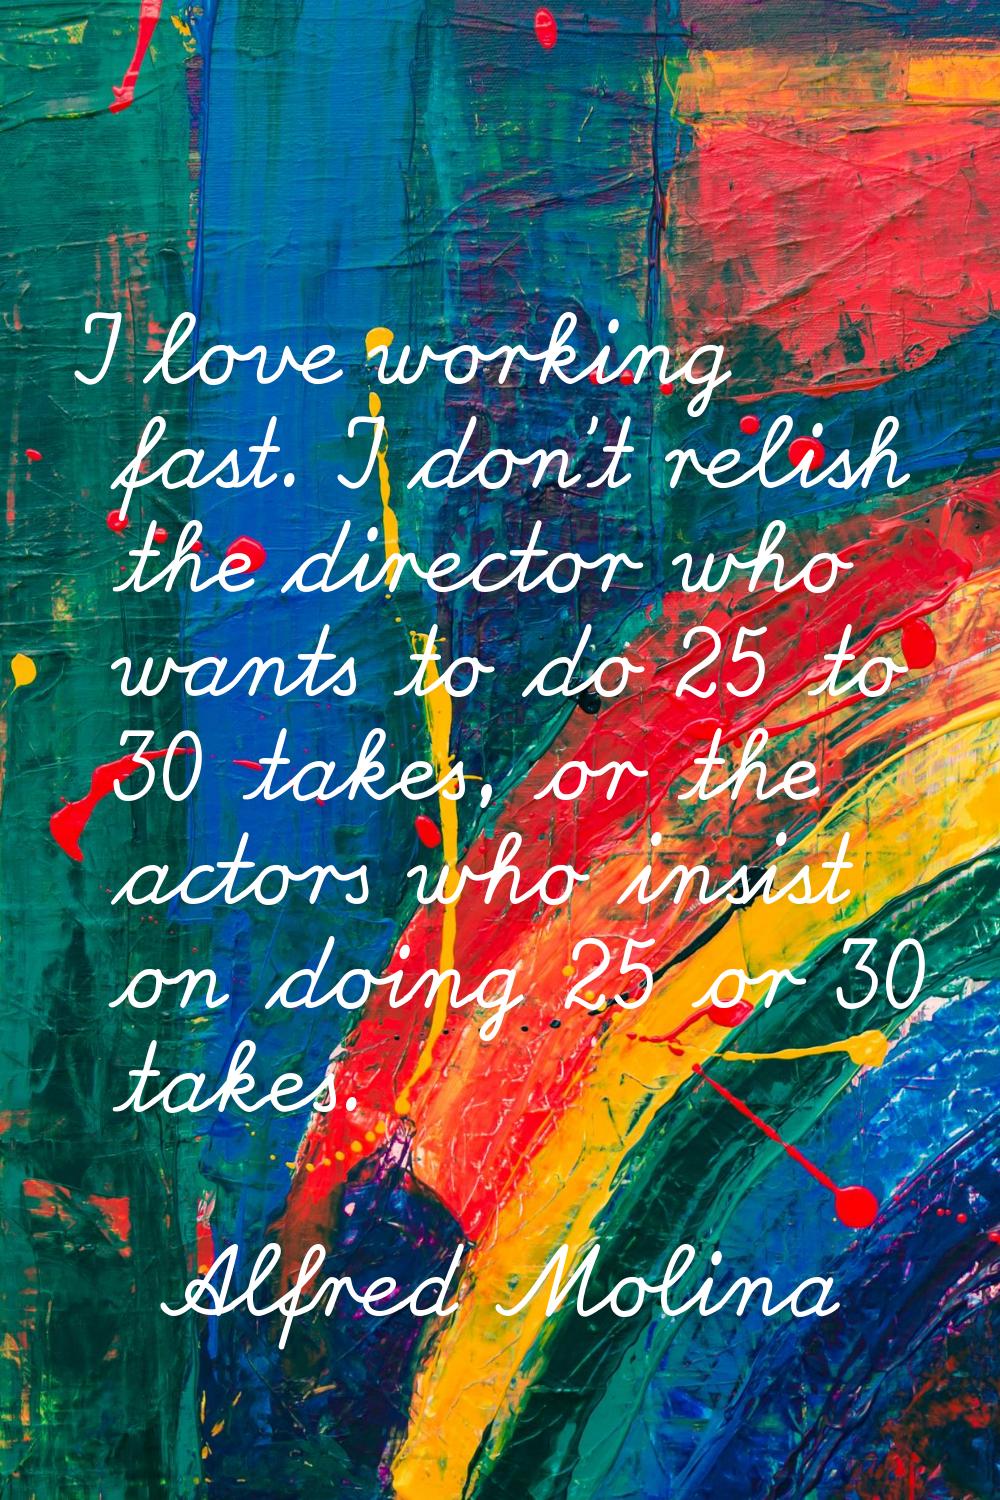 I love working fast. I don't relish the director who wants to do 25 to 30 takes, or the actors who 